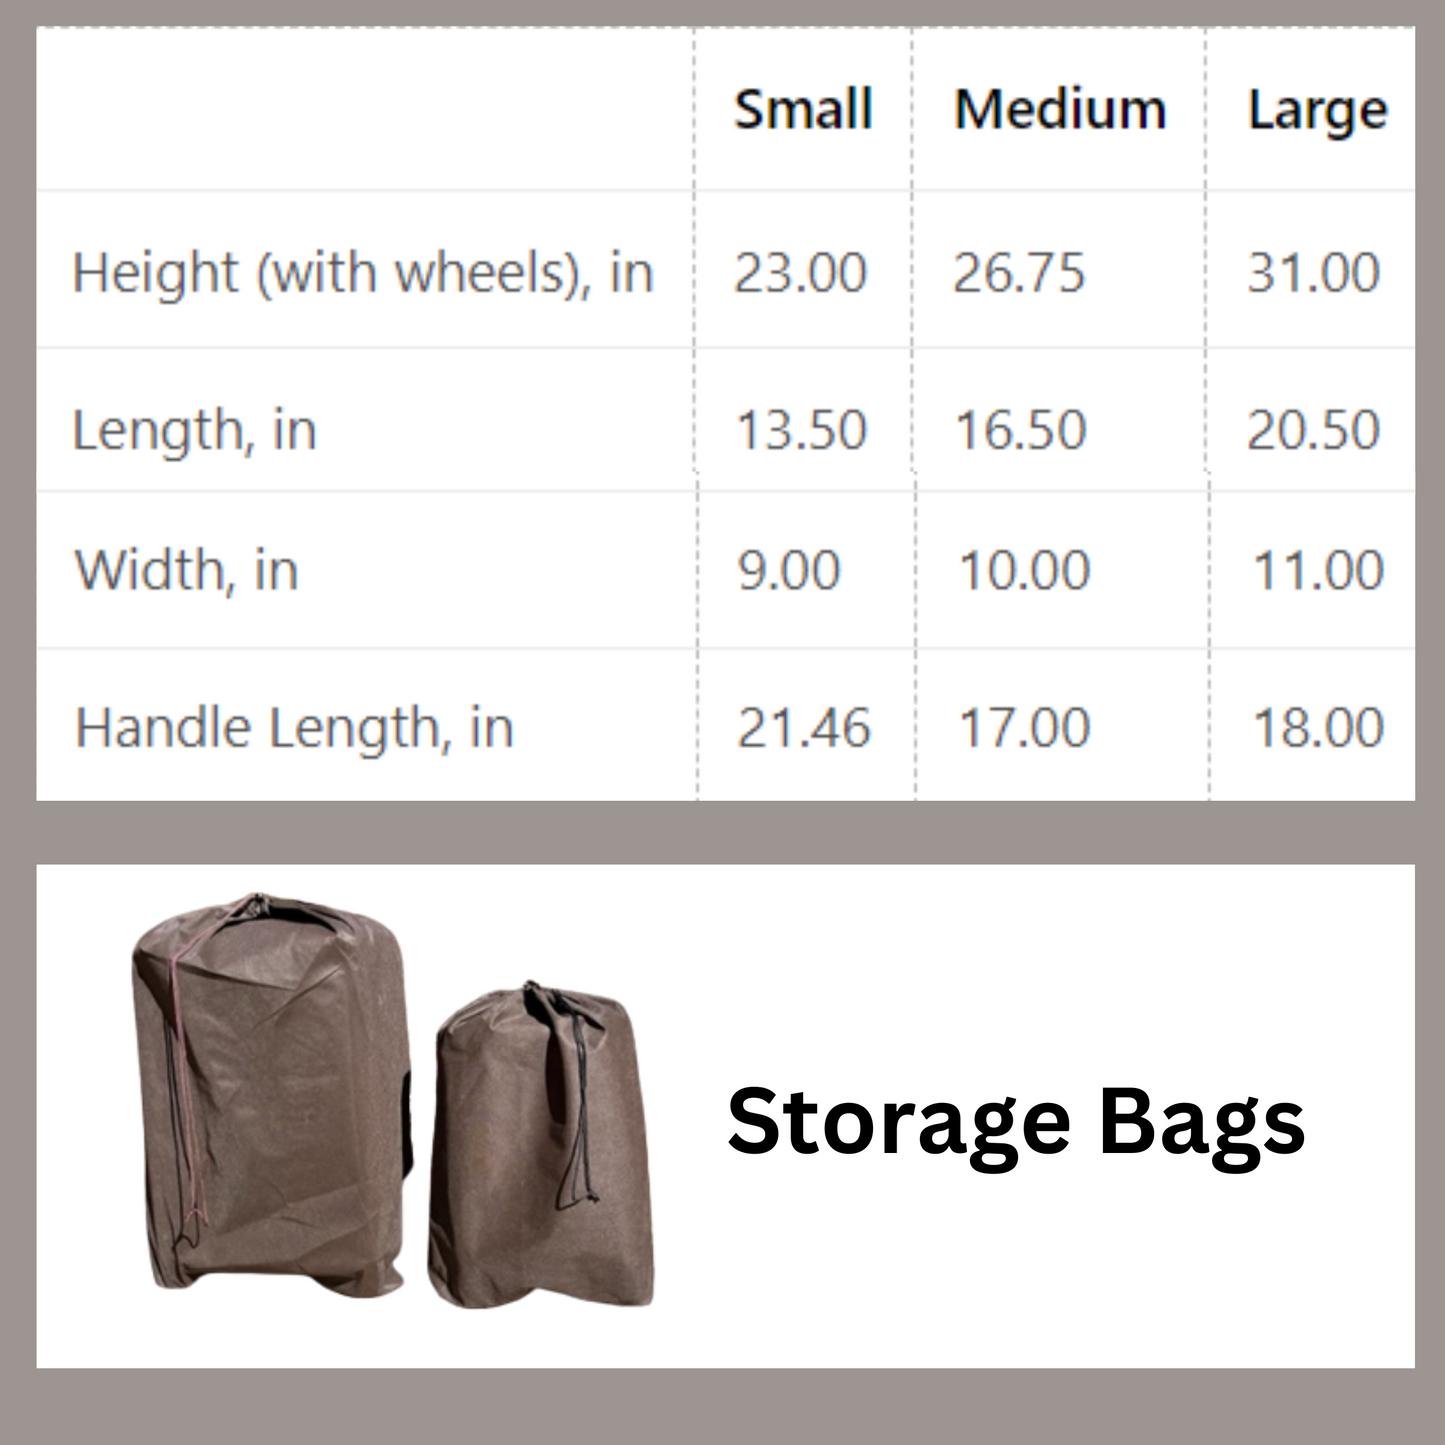 The size chart to compare the small, medium and large suitcases. All suitcases get storage bags.